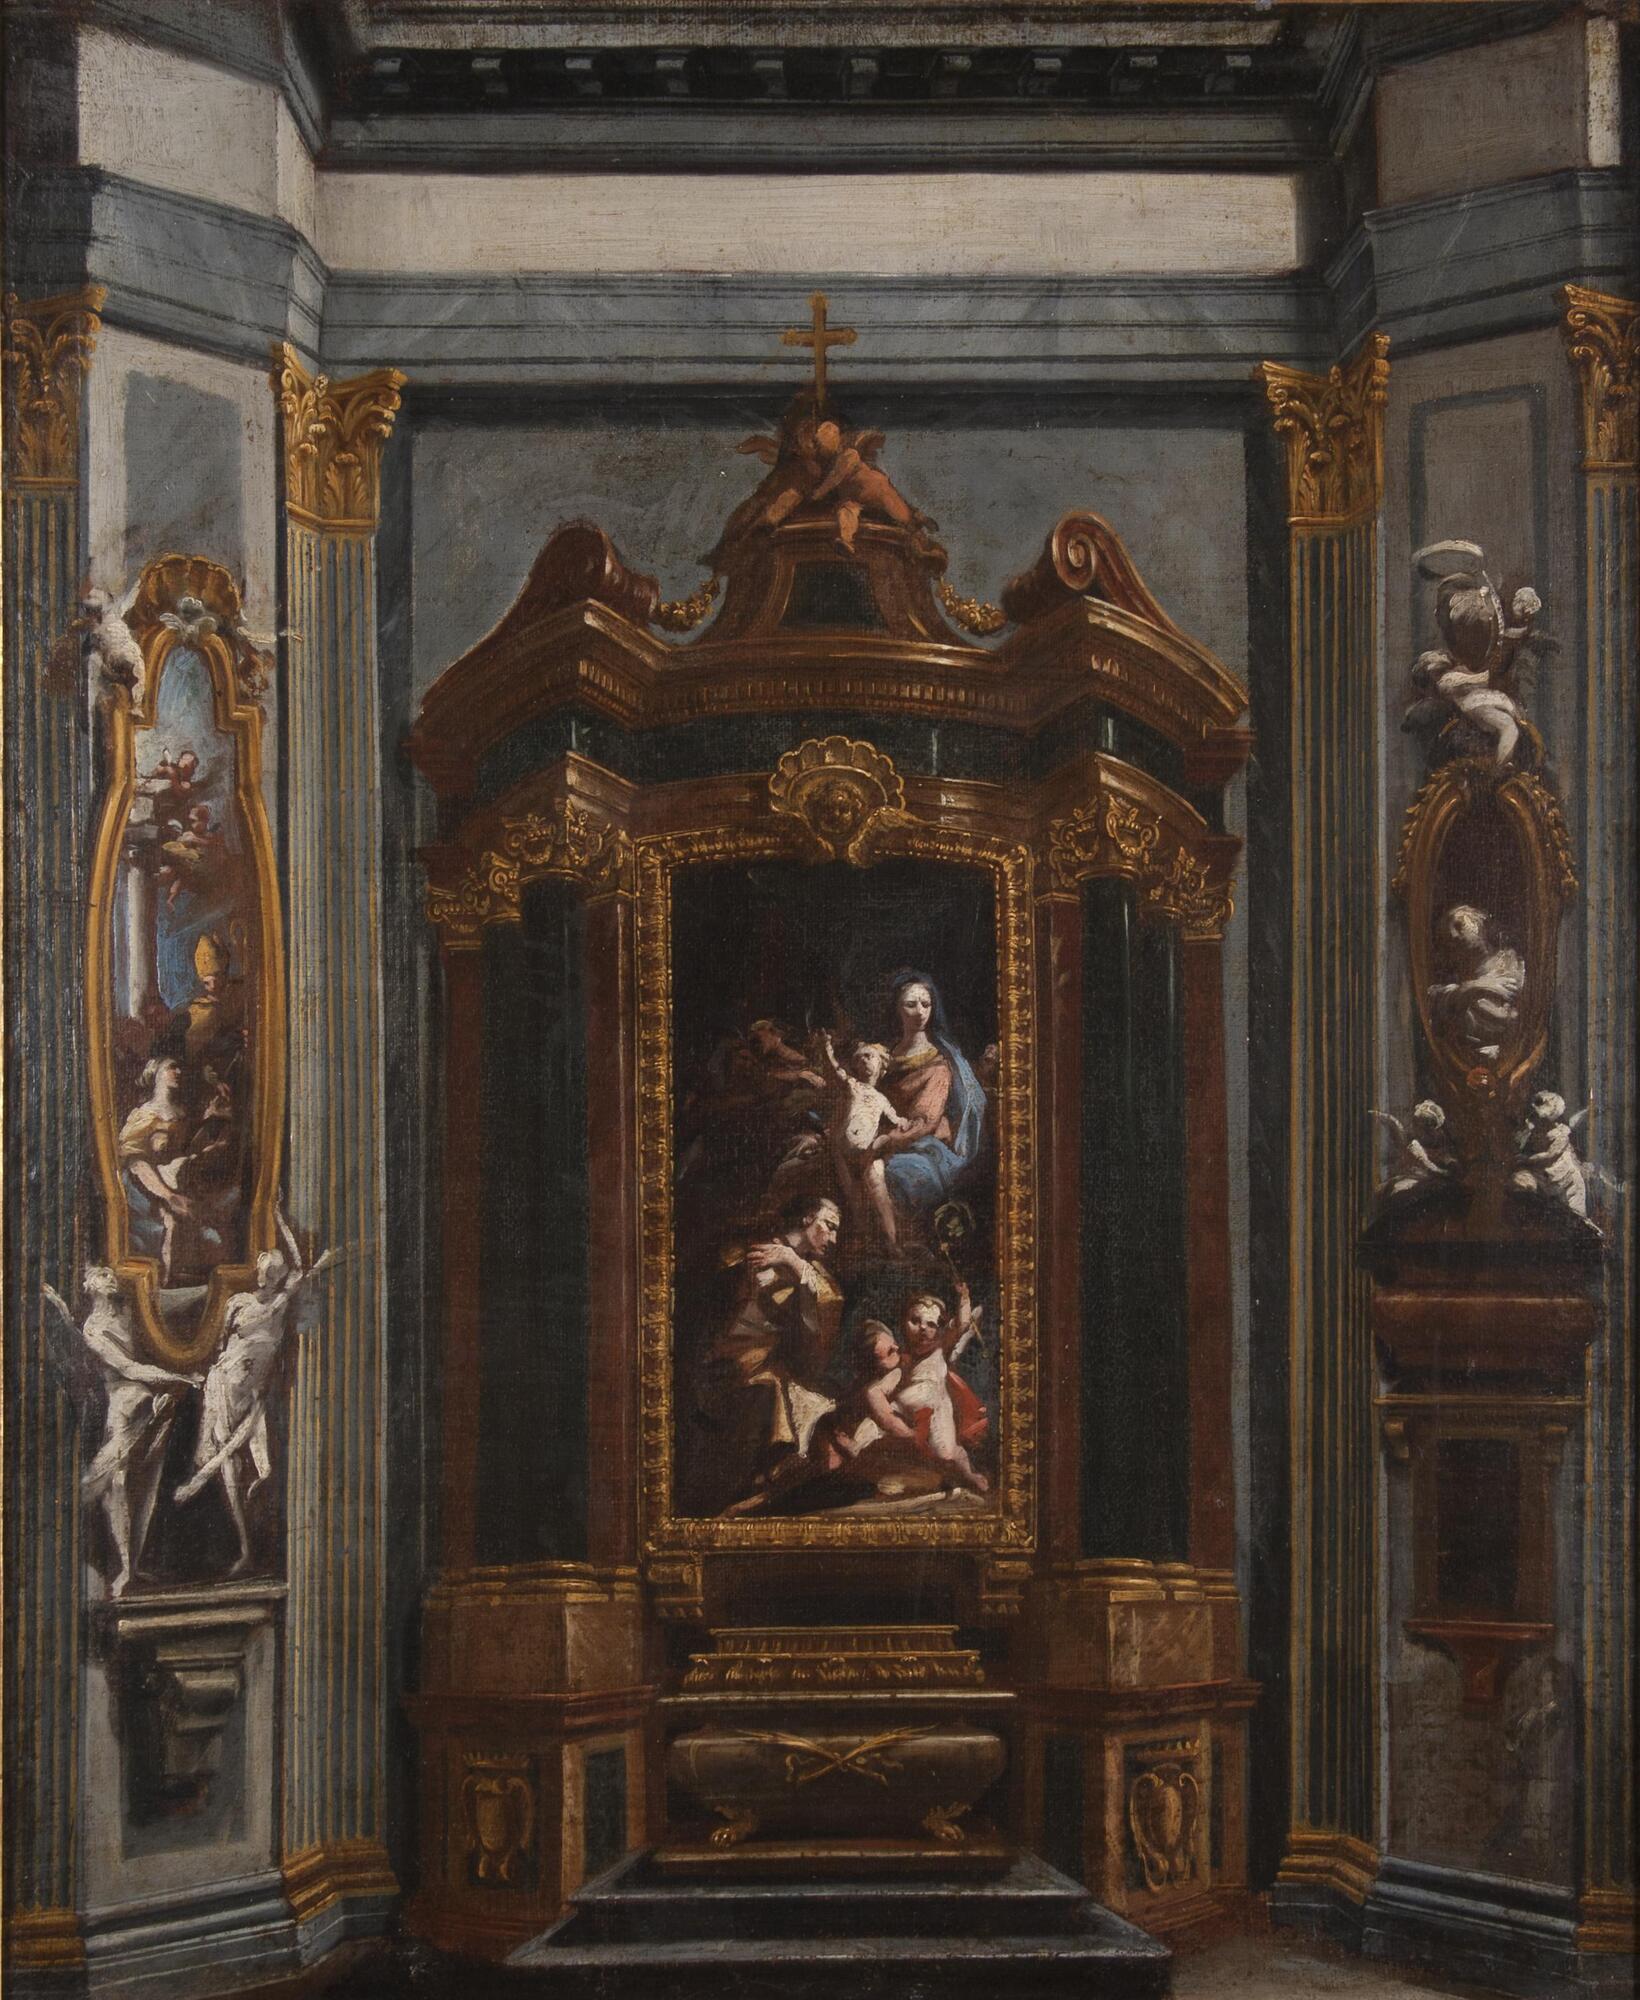 This study depicts a rectangular chapel with the side walls bent outward at an angle in order to provide a clearer view of the decoration. The chapel design centers upon a sarcophagus placed beneath a painted altarpiece of the Virgin and Child, which are both set within a semicircular architectural projection that extends dynamically from the wall. On the left the pair of angels that support a large oval-shaped painting reach vigorously outward, their wings overlapping the pilasters. On the right appears another sarcophagus surmounted by a pair of putti. Leaning out from the oval niche above the sarcophagus is a female half-figure—probably a portrait of the deceased—making a gesture of devotion toward the altar.